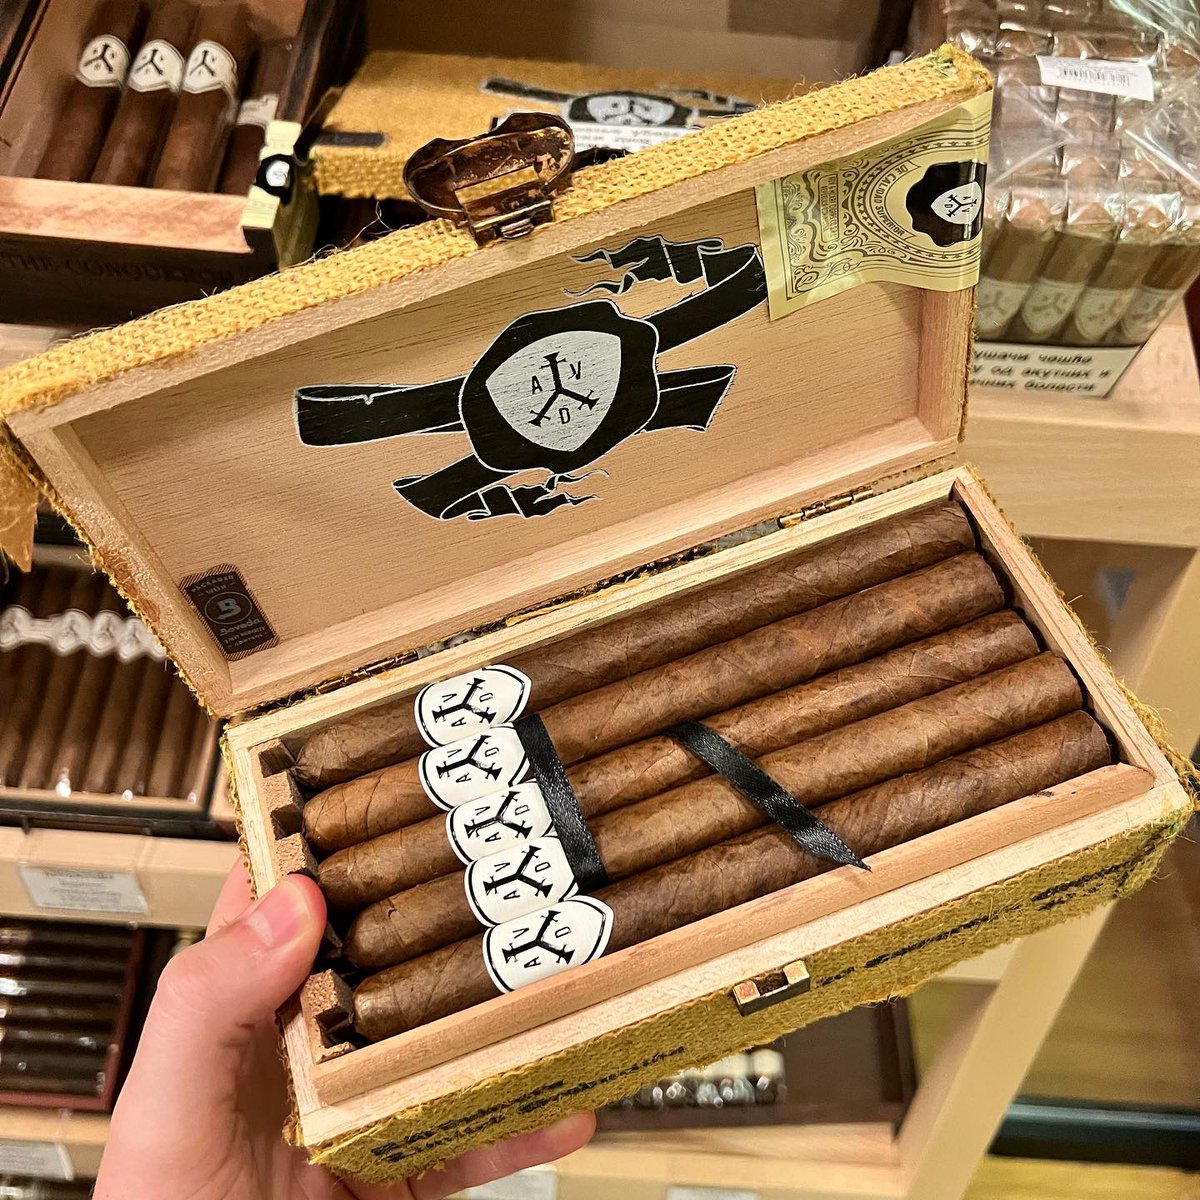 Conqueror Emperor’s Edition. Outstanding cigar that comes in one of the most interesting and one of the most creative box in terms of shape that is completely unique 😋👍🏻🔥🇩🇴